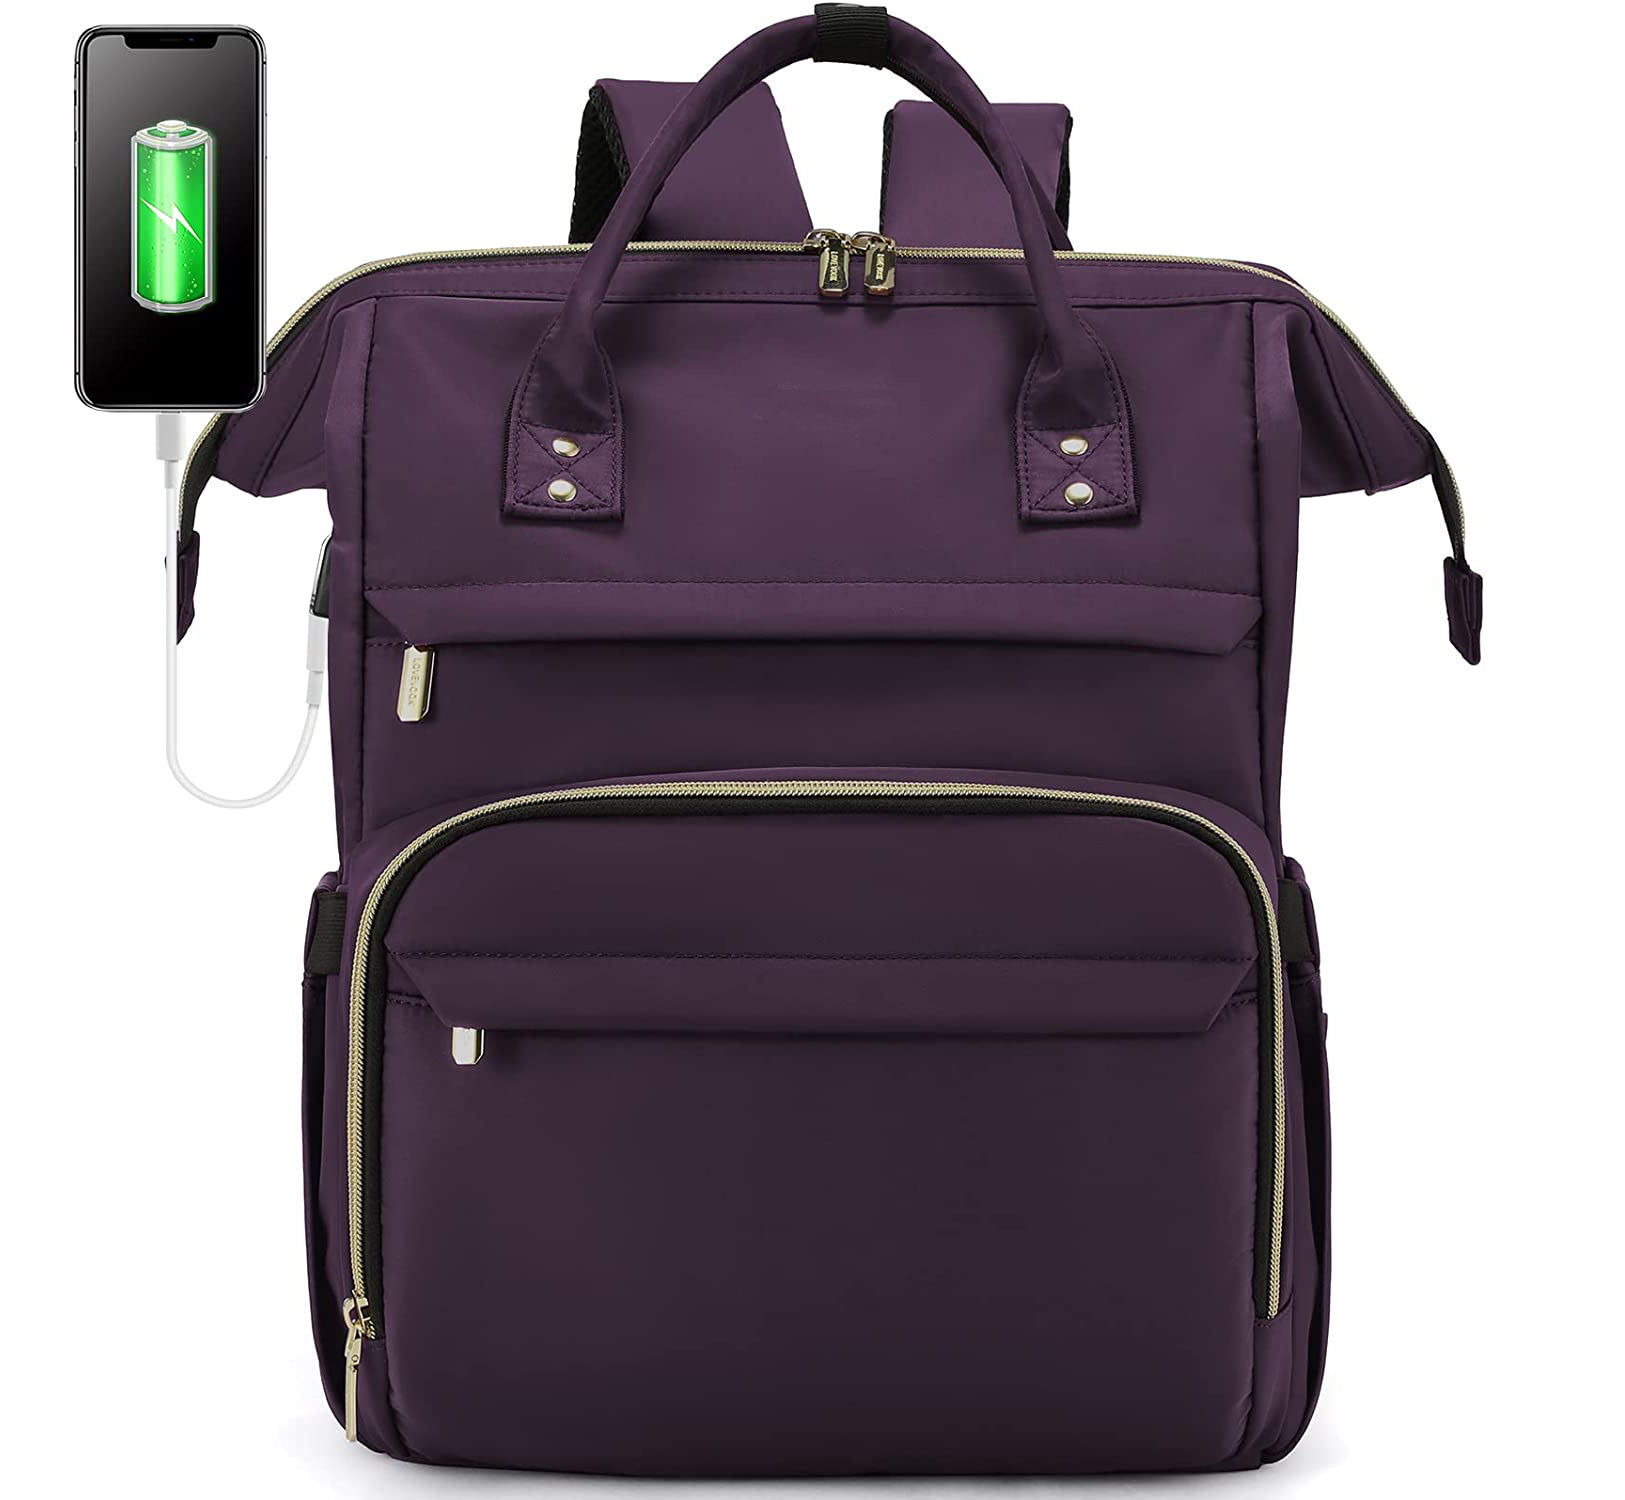 Laptop Backpack For Women Fashion Travel Bags Business Computer Purse Work Bag With Usb Port